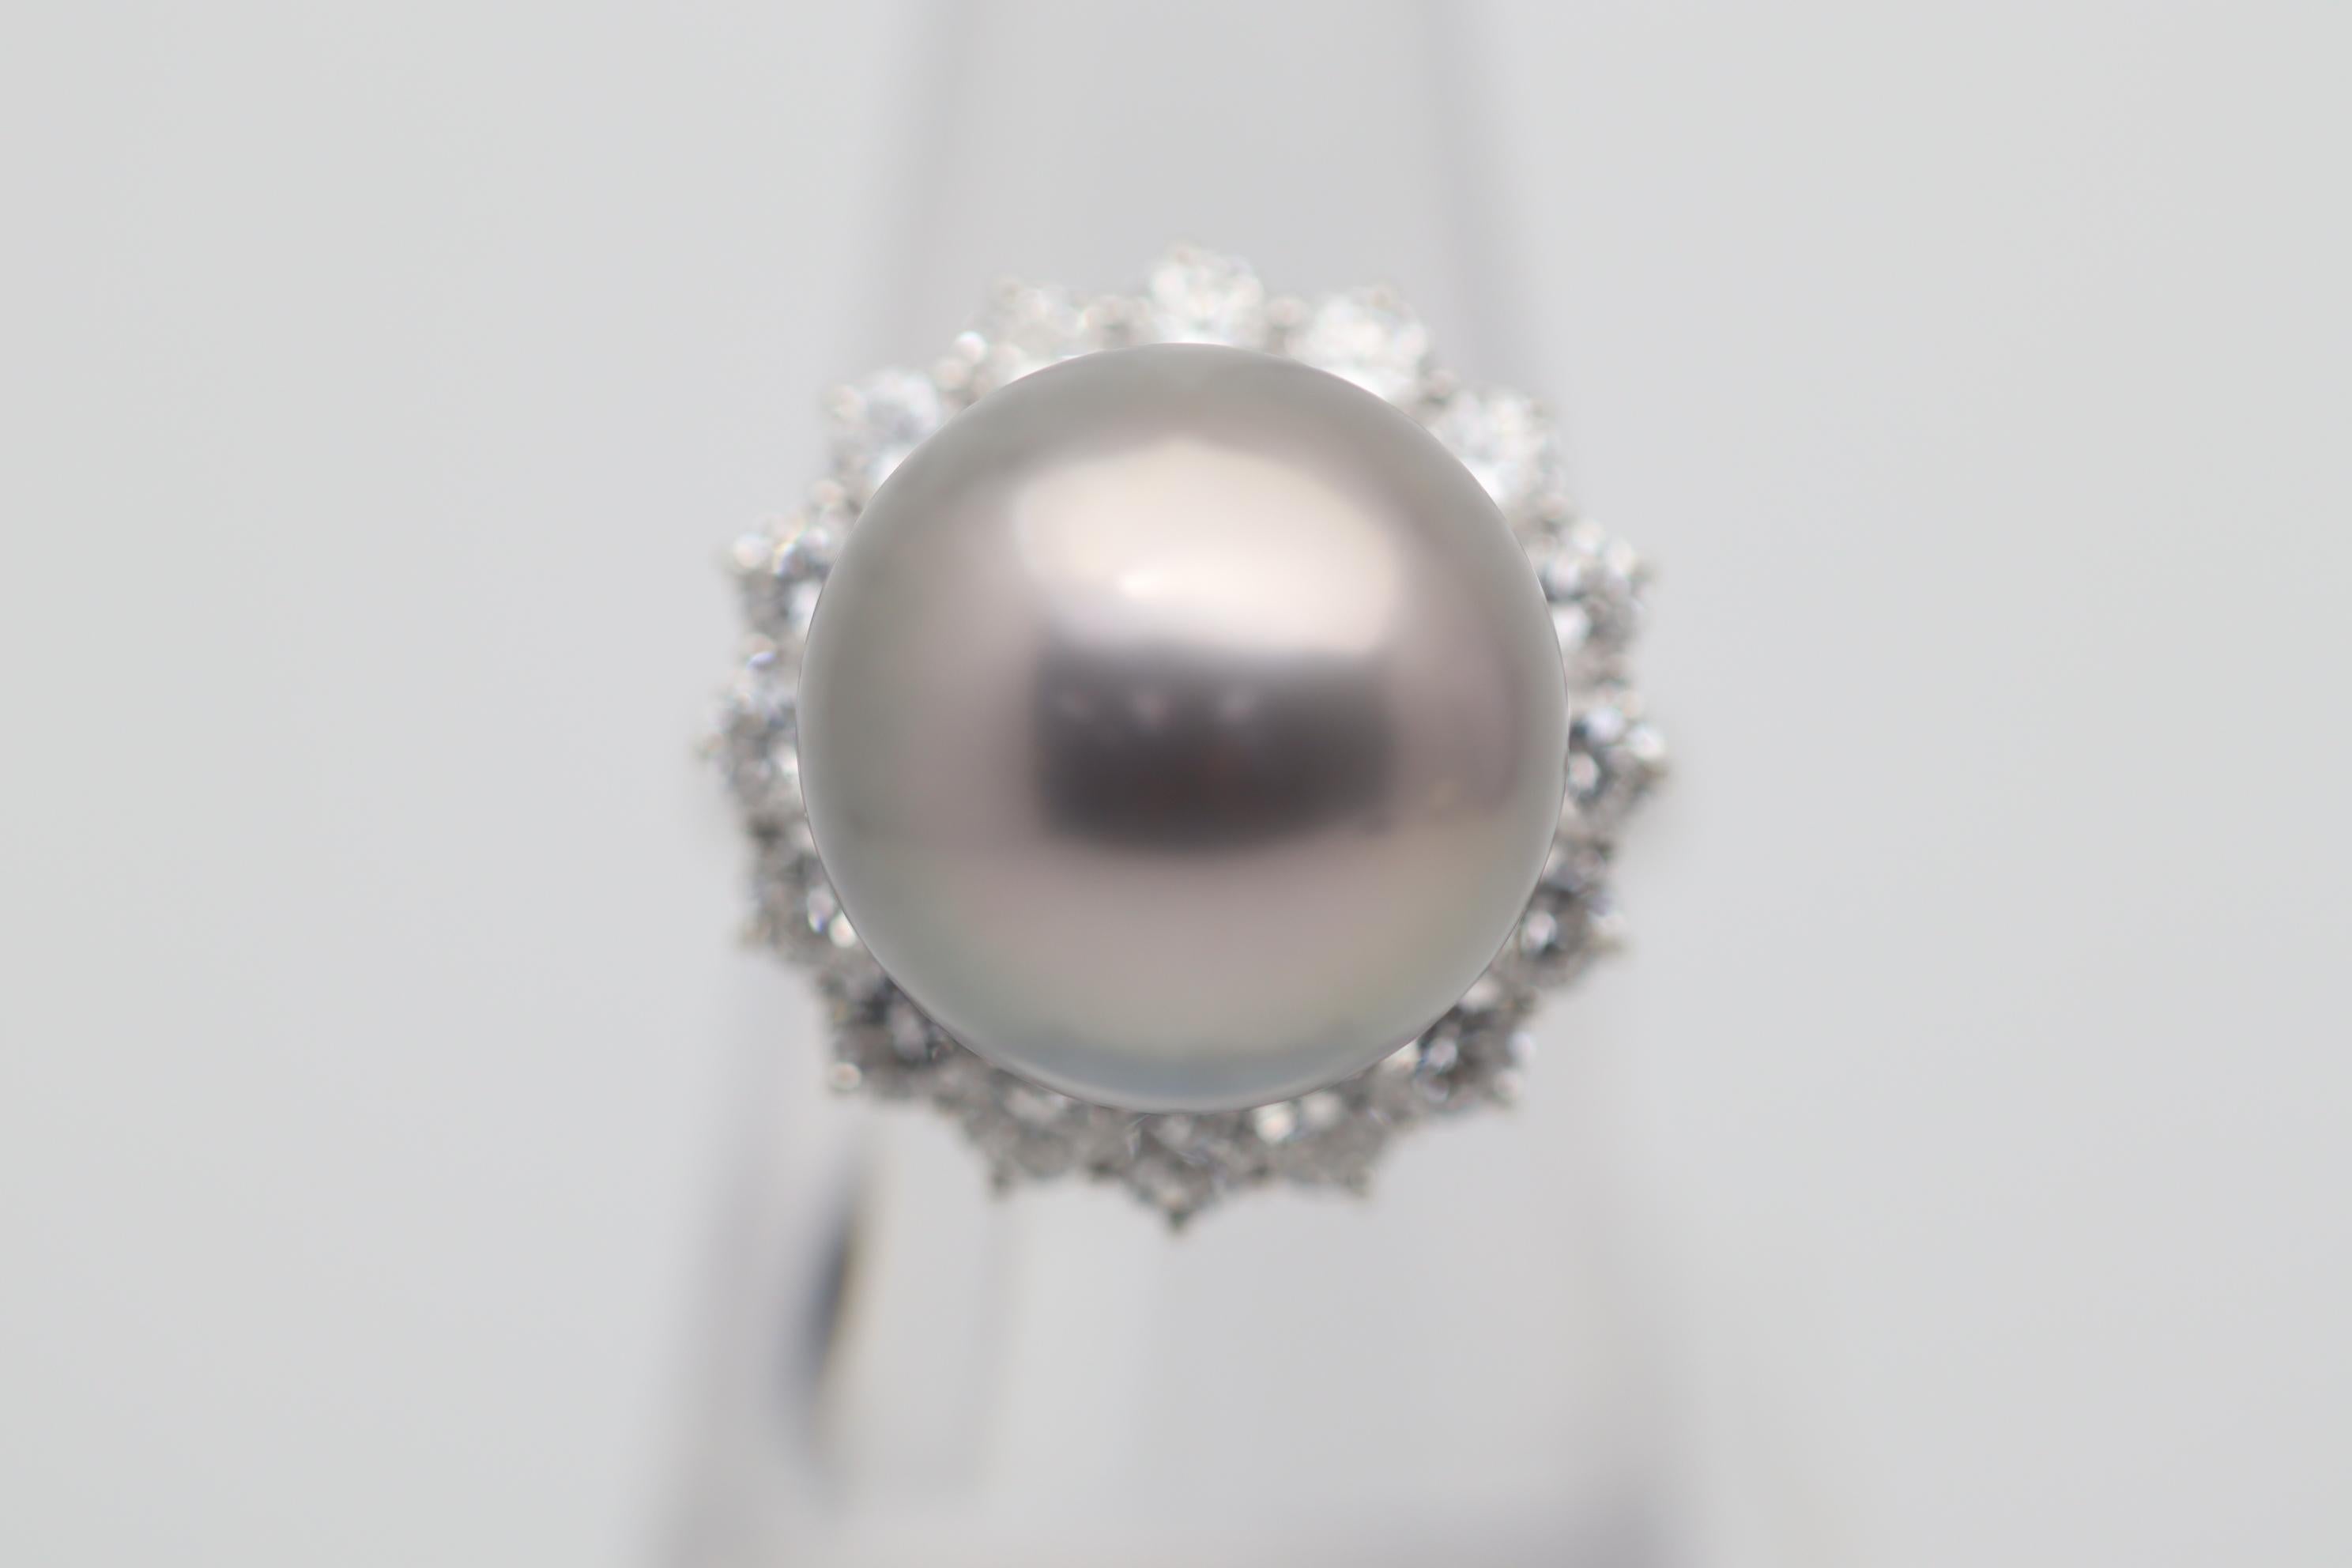 A fine Tahitian pearl measuring 15-millimeters takes center stage. It has a perfectly round shape along with an intense silver-gray color, fantastic nacre, strong luster, and a soft pink overtone. It is complemented by 1.76 carats of round